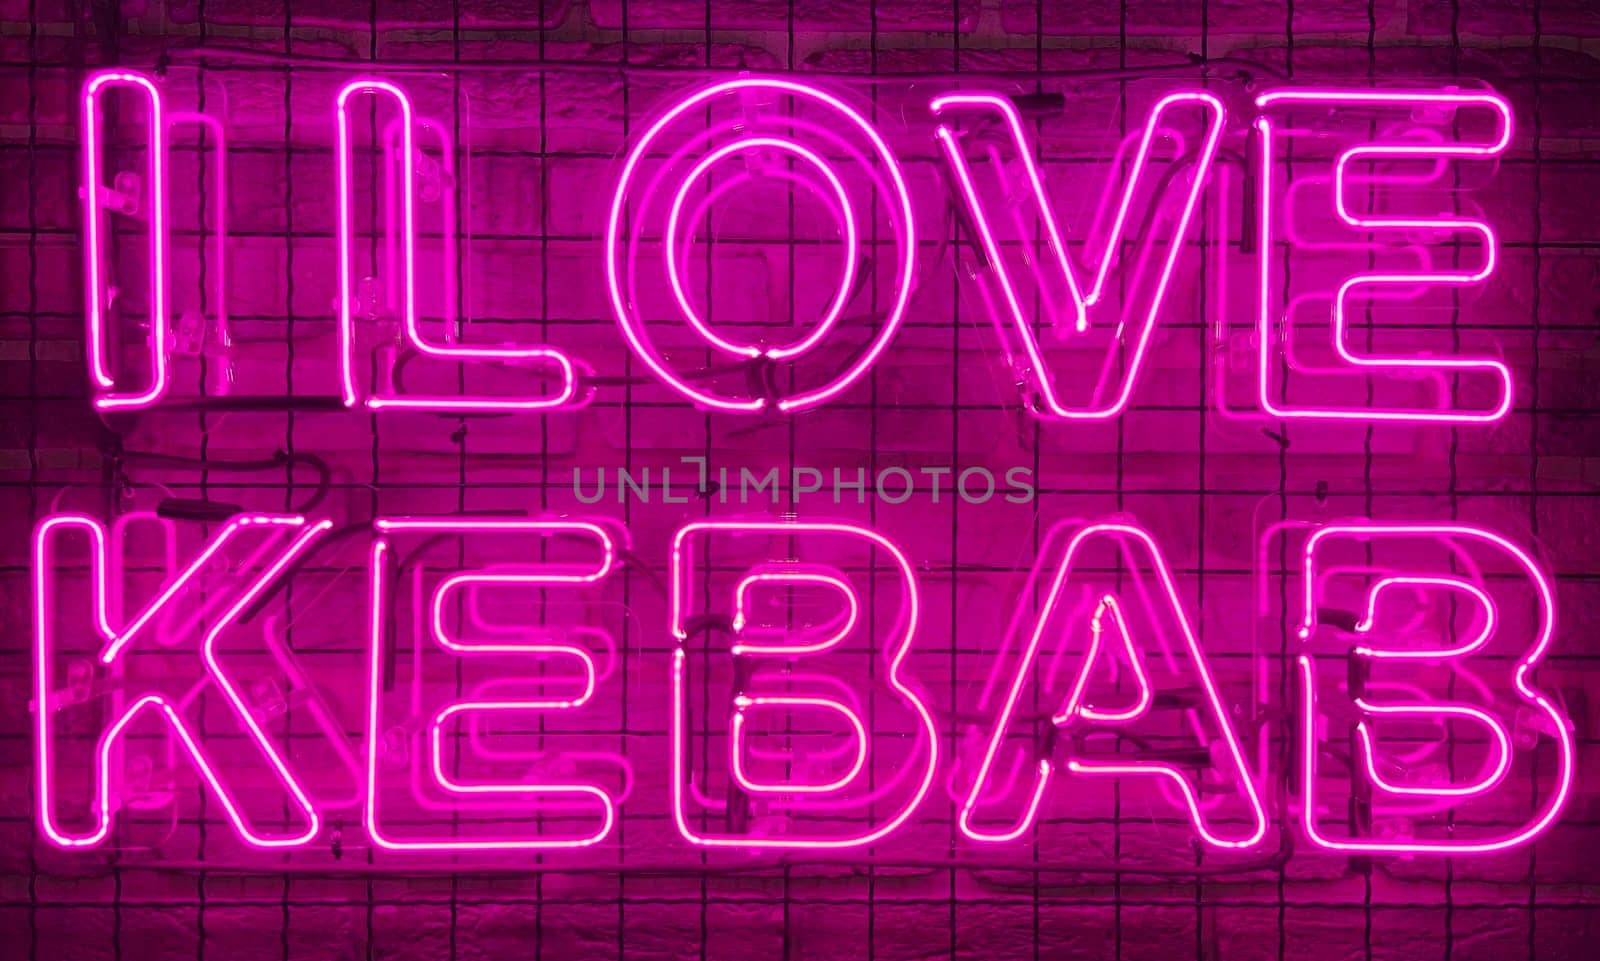 Neon shining sign in pink or purple color on a brick wall with the inscription or slogan I love kebab. Brick wall, background. Bright electric neon light. Cafe-restaurant Doner Kebab